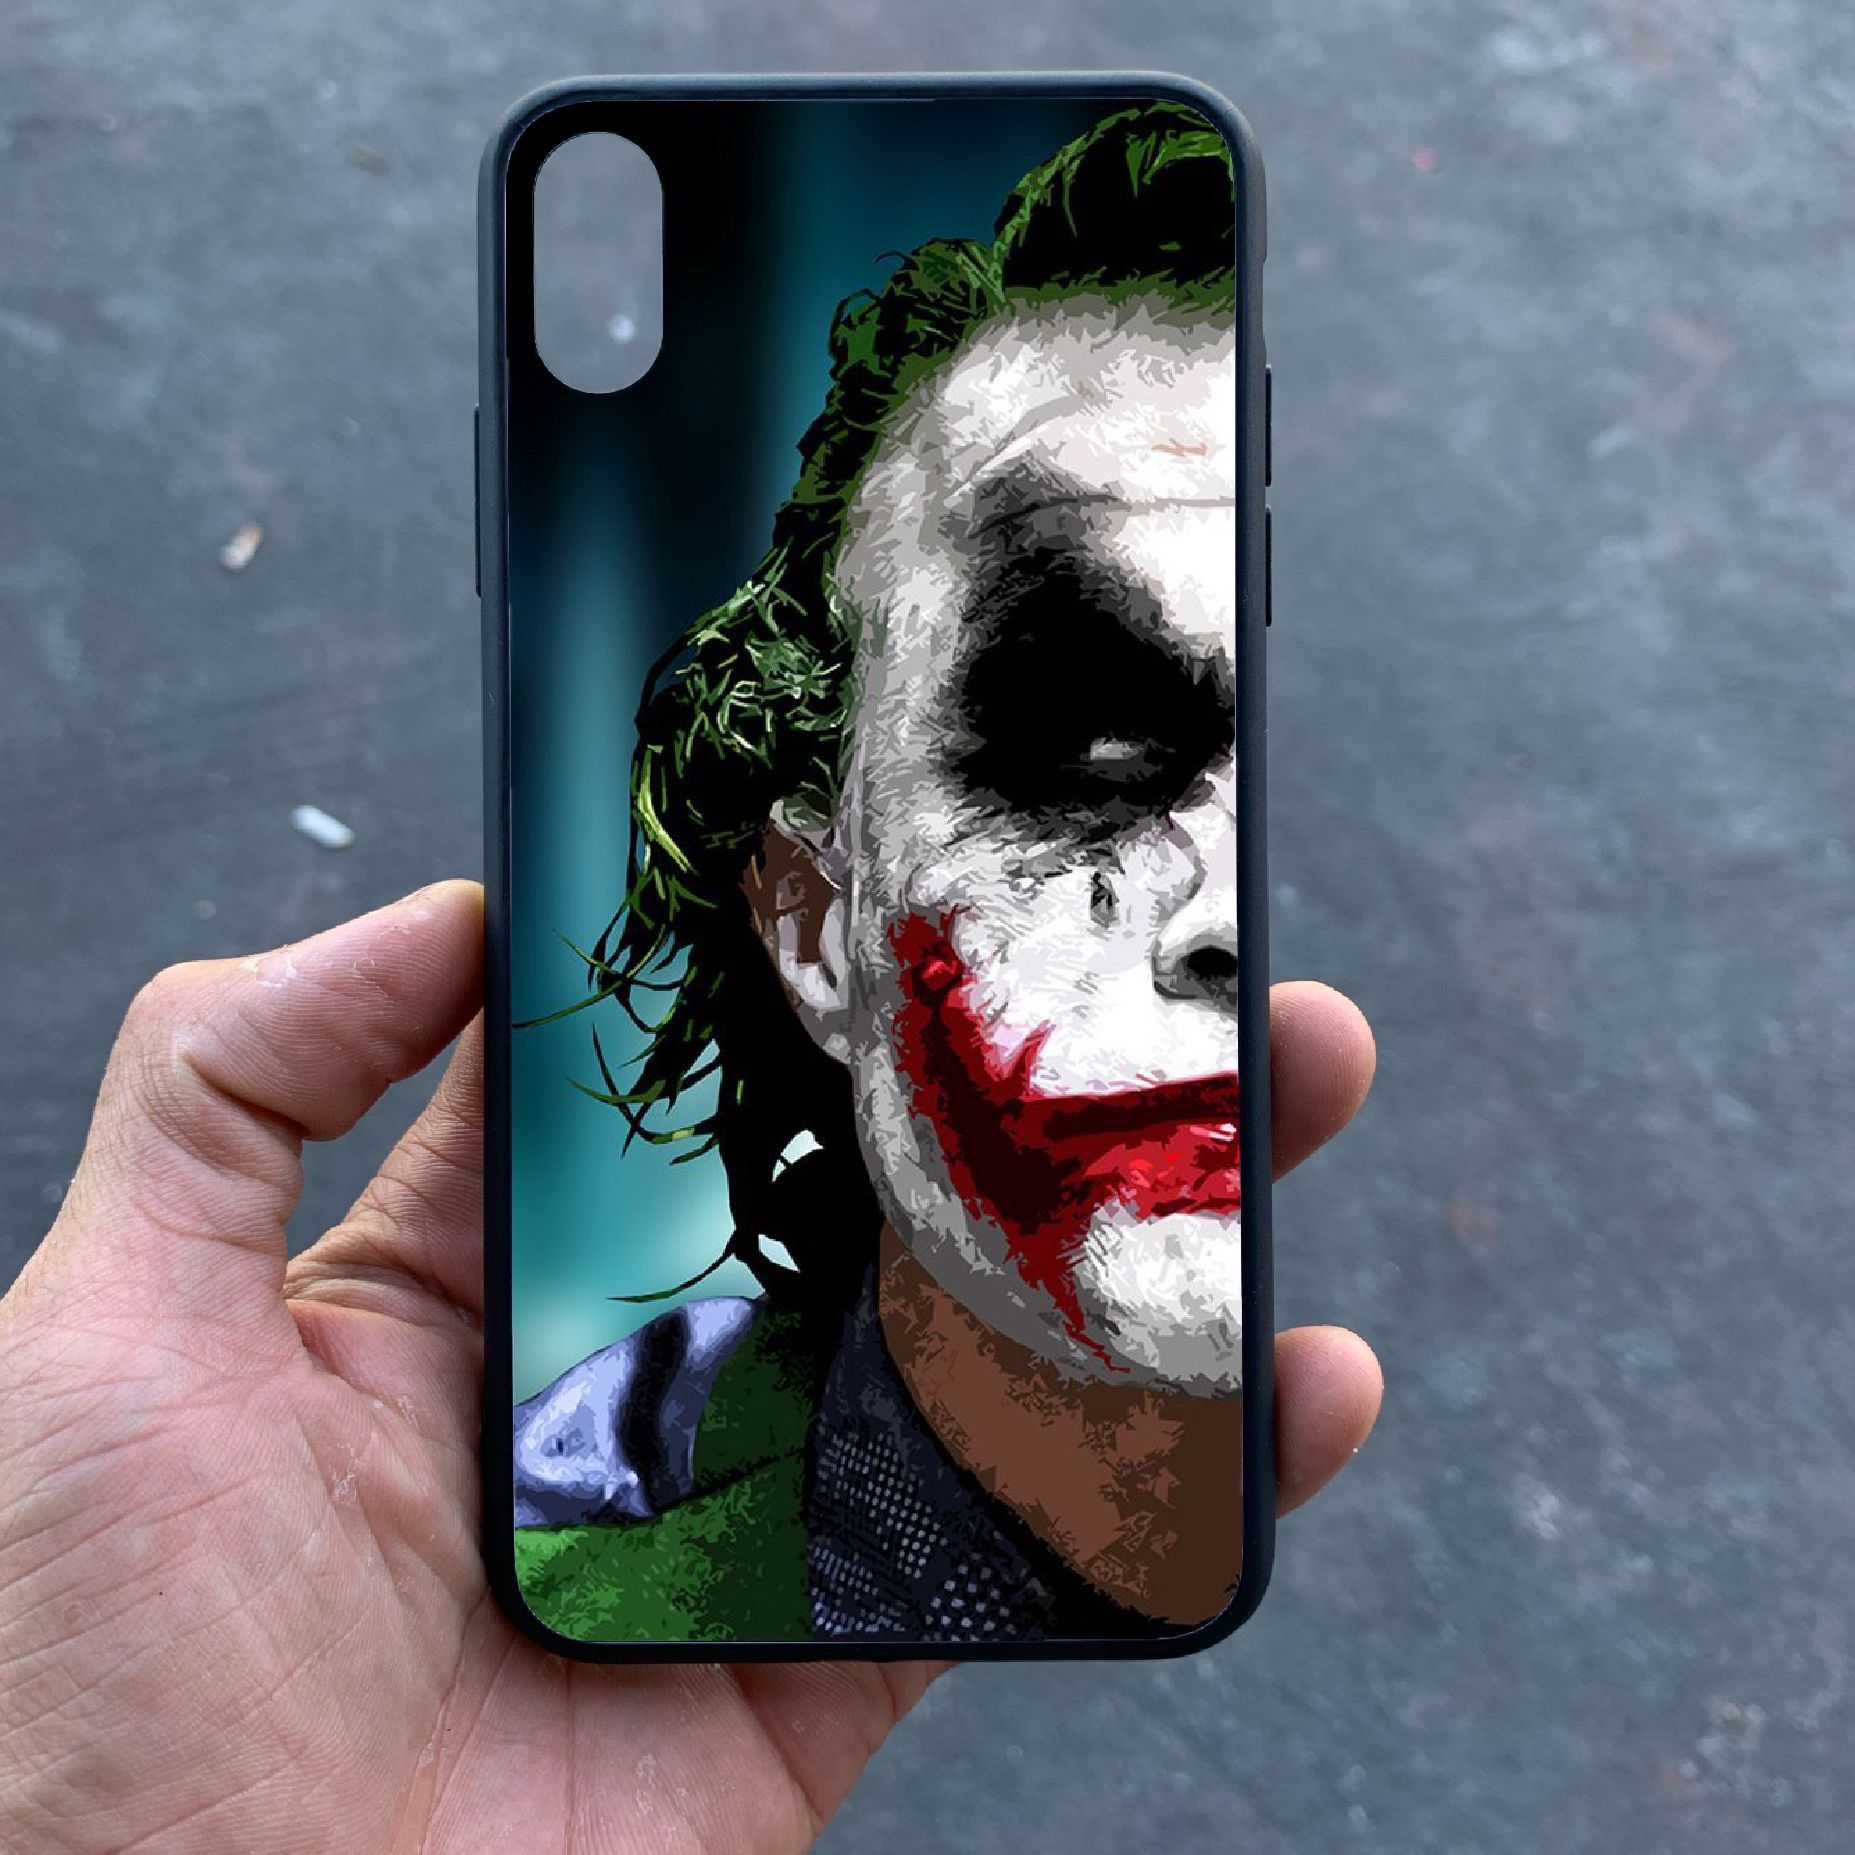 Joker - phone case for iphone or galaxy